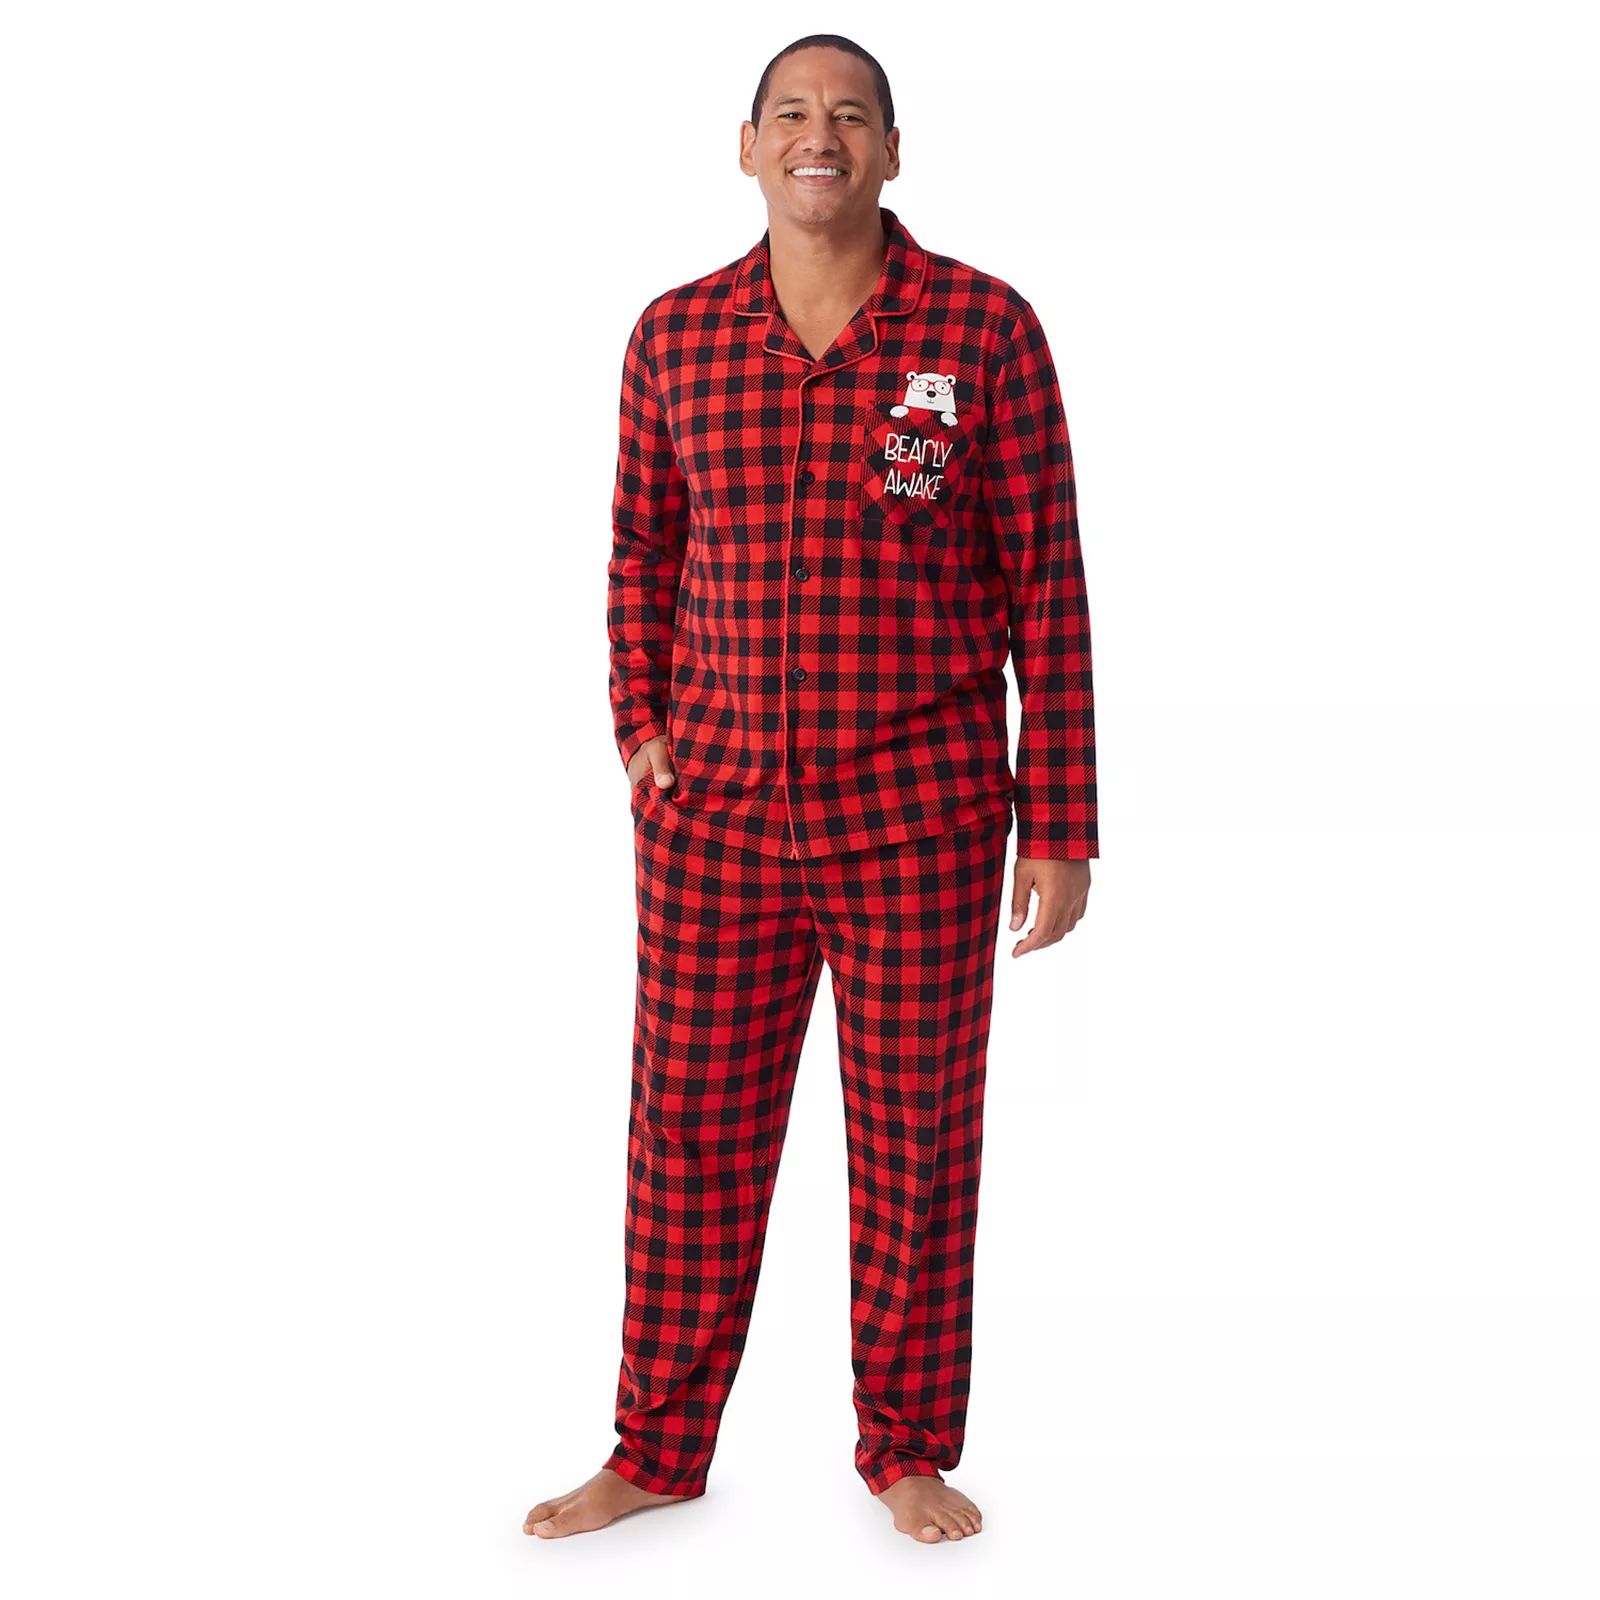 Men's Jammies For Your Families Cool Bear Plaid Top & Pants Pajama Set by Cuddl duds, Size: Large, B | Kohl's